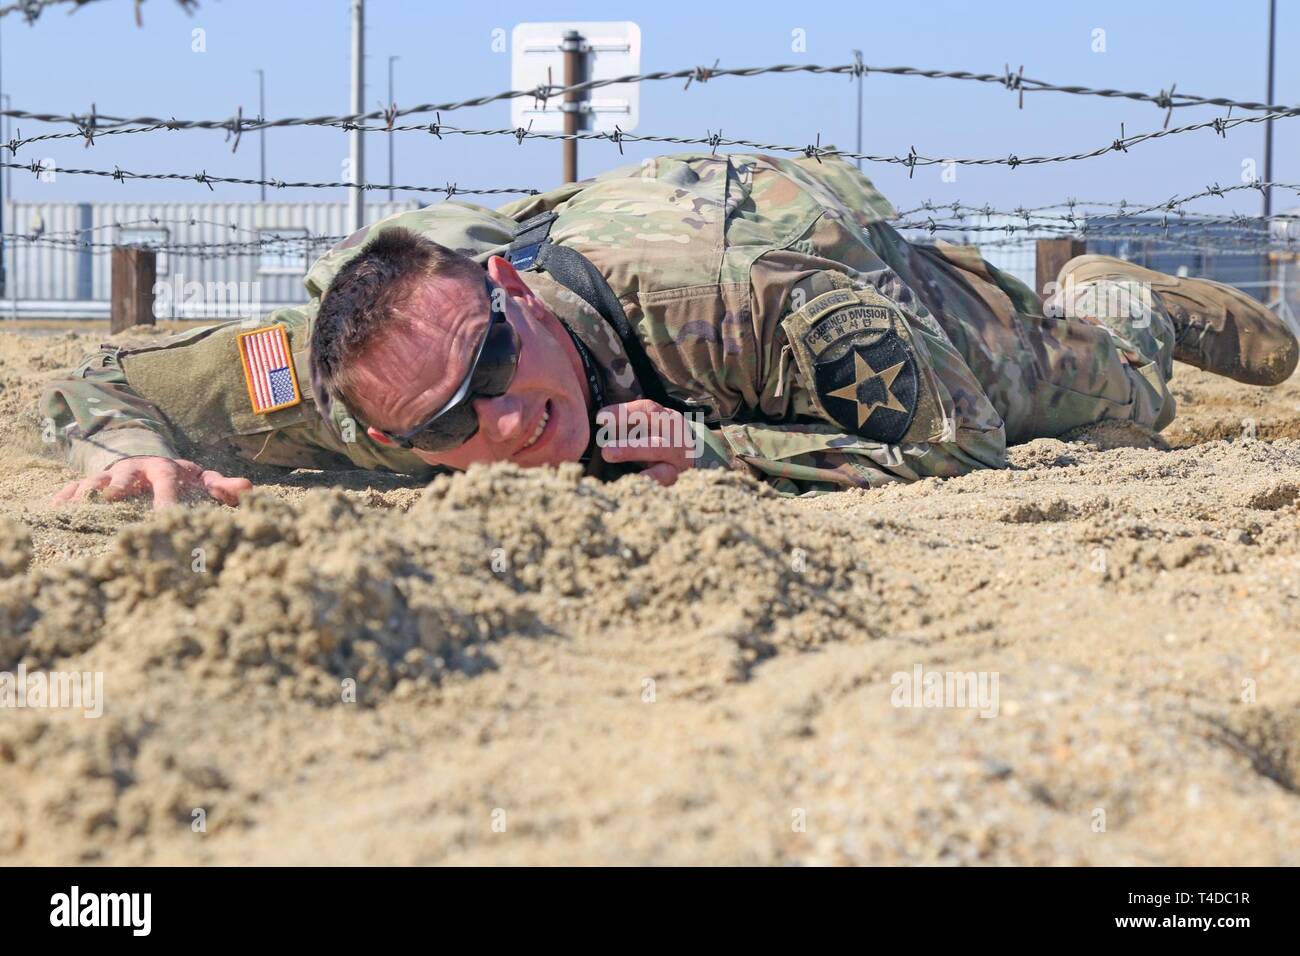 CAMP HUMPHREYS, Republic of Korea - Capt. Colby S. Miller, Phenix City, Alabama native, infantry officer, 2nd Infantry Division/ROK-U.S. Combined Division, low crawls through an obstacle course, March 22, in preparation for the 2019 Best Ranger Competition taking place at Fort Benning, Georgia April 12-14. Miller and teammate, Capt. Jonathan J. Kaminski, Atlanta, Georgia native, field artillery officer, 2nd Combat Aviation Brigade, will compete as a two-person team against more than 50 other Ranger teams. Stock Photo